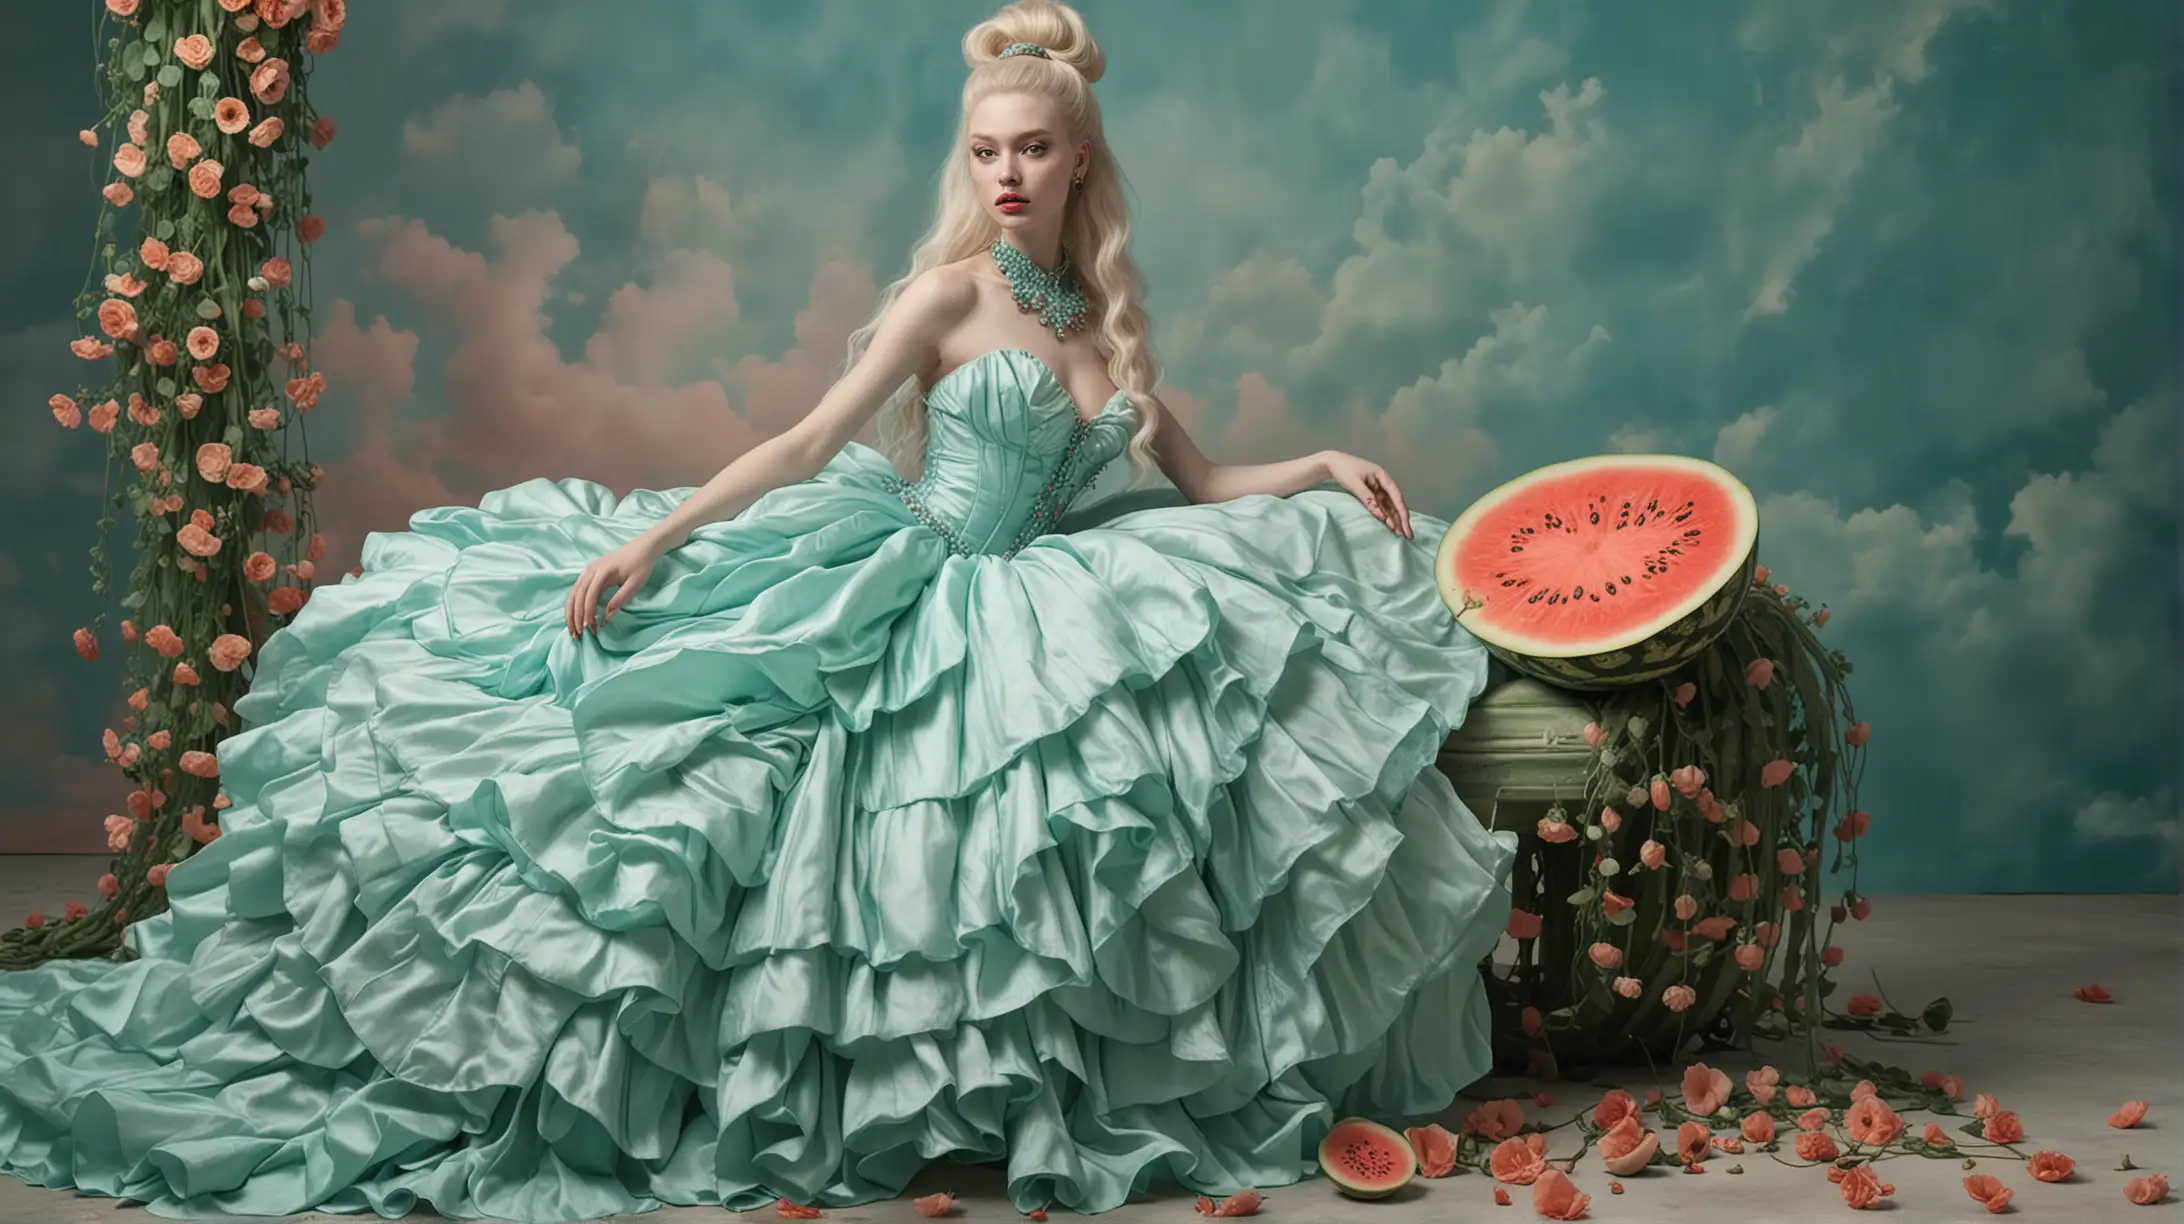 Surreal Fashion Portrait with Watermelon Throne and Tiffany Blue Gown